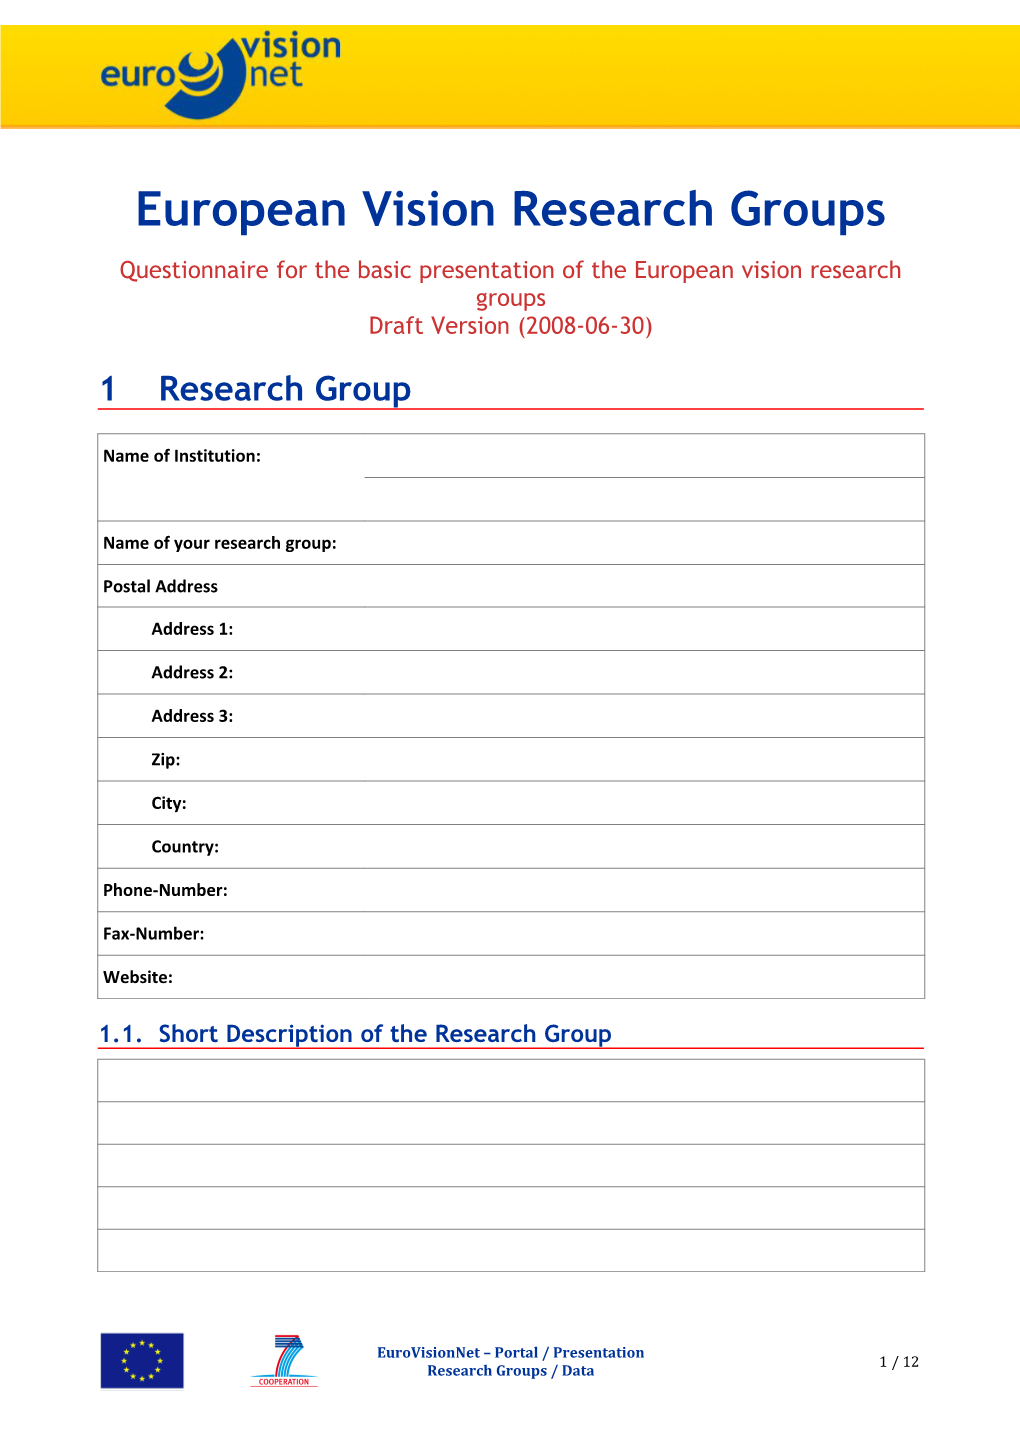 Questionnaire - Presentation of the European Vision Research Groups